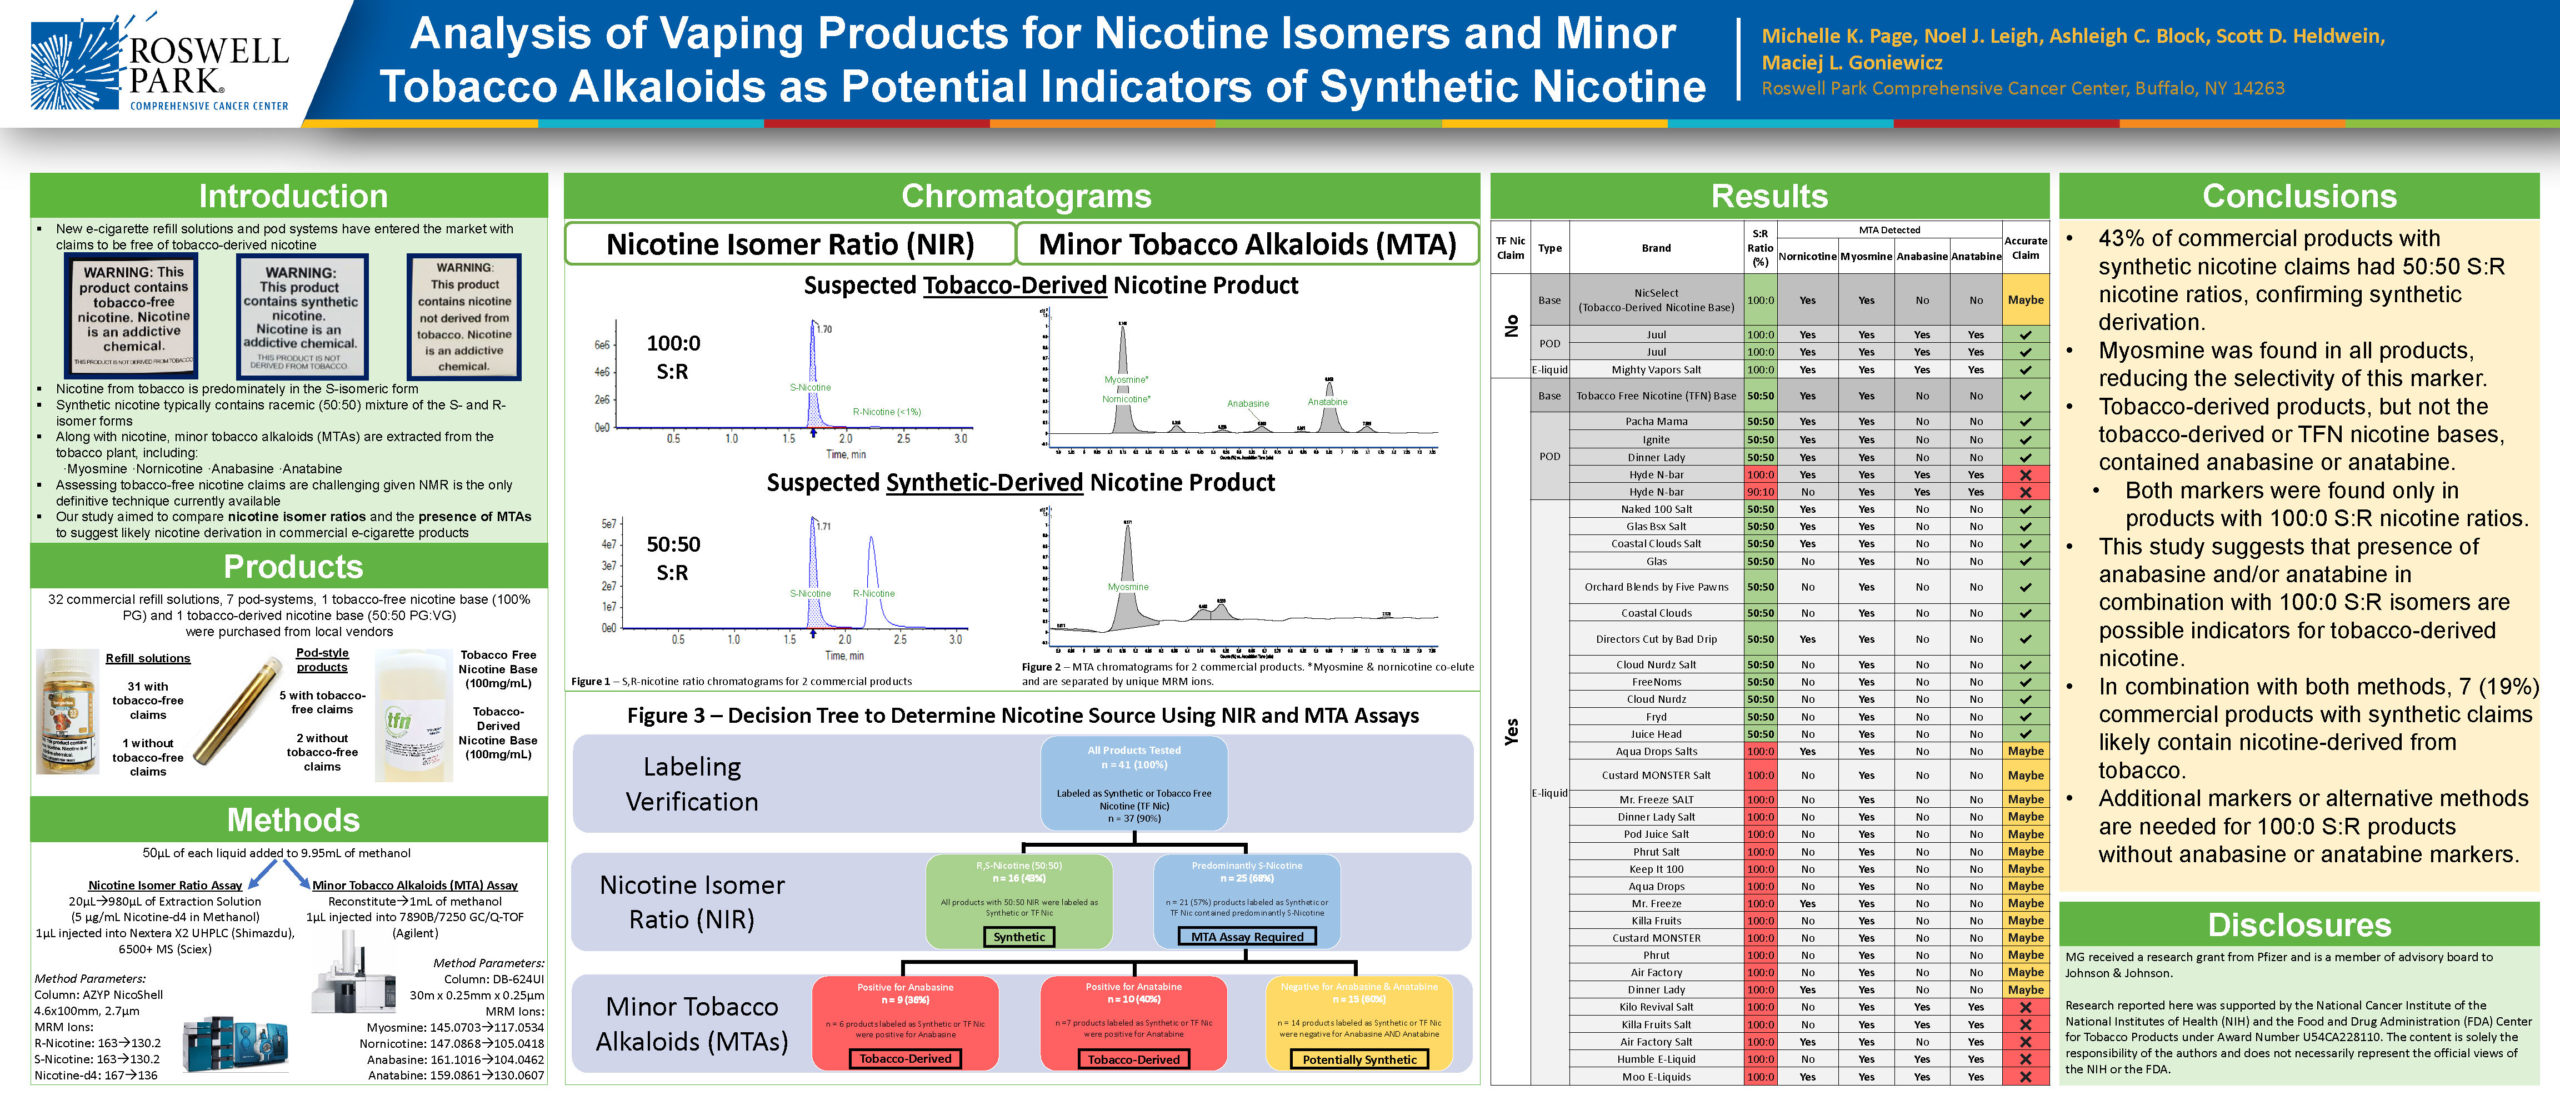 Analysis of Vaping Products for Nicotine Isomers and Minor Tobacco Alkaloids as Potential Indicators of Synthetic Nicotine